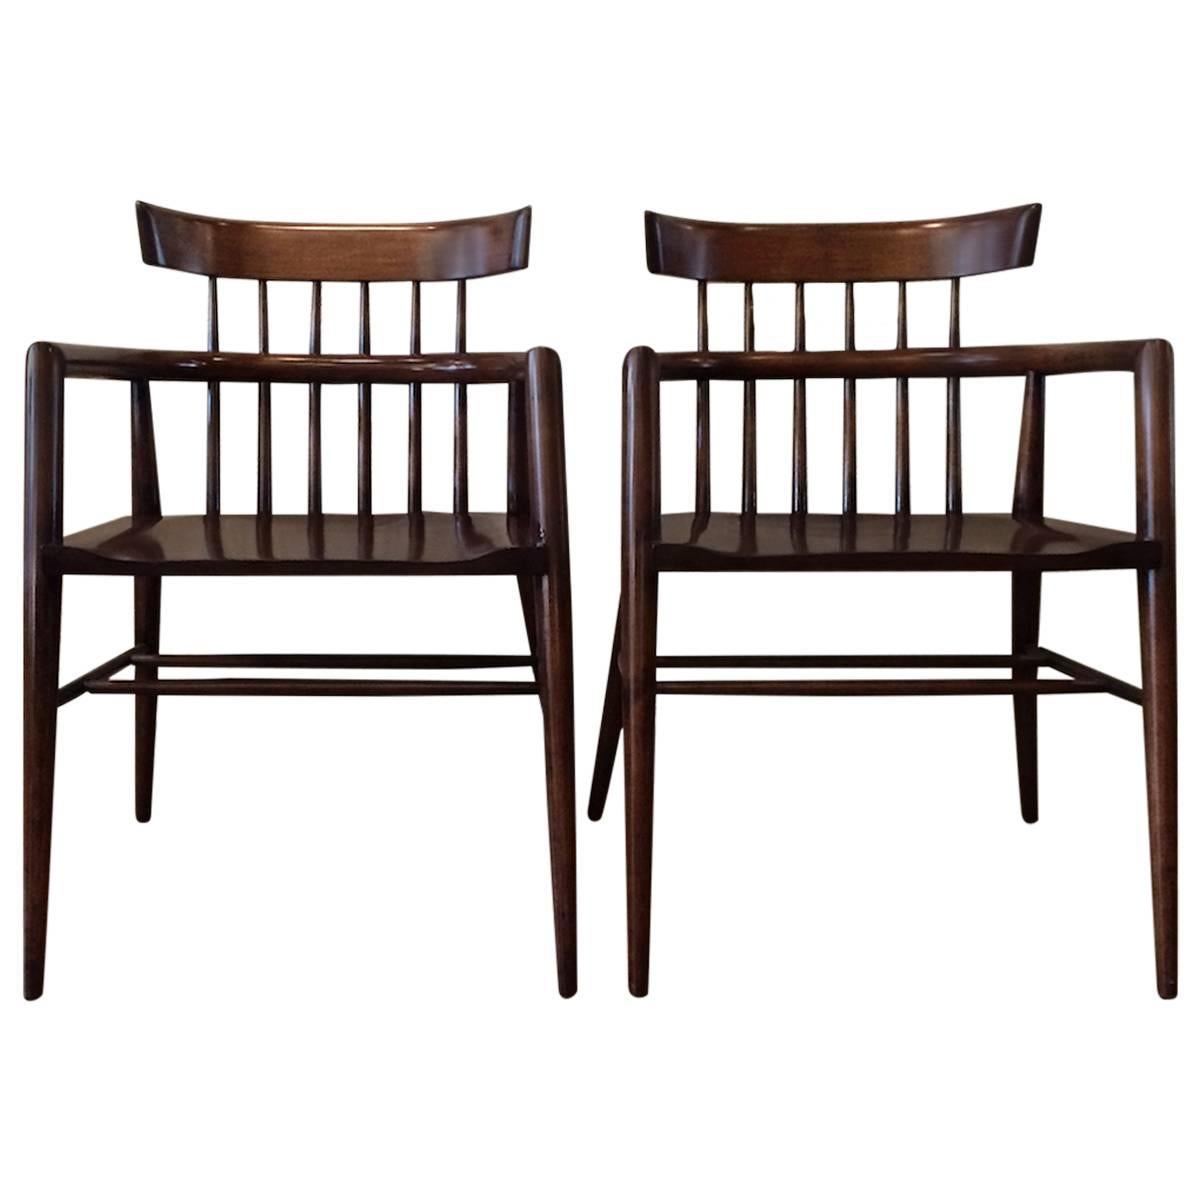 Paul McCobb Spindle Back Windsor Style Armchairs